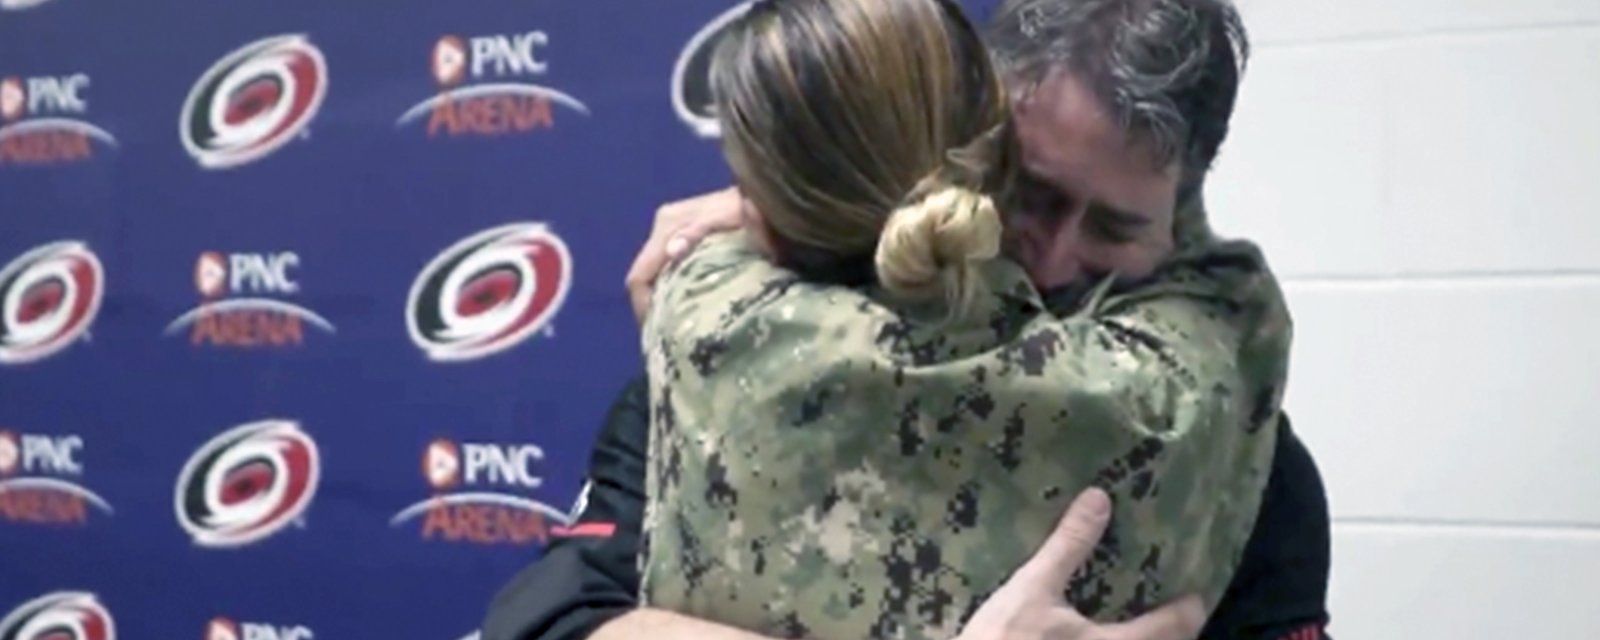 Hurricanes coach Rod Brind’Amour helps a solider surprise her father with an emotional return